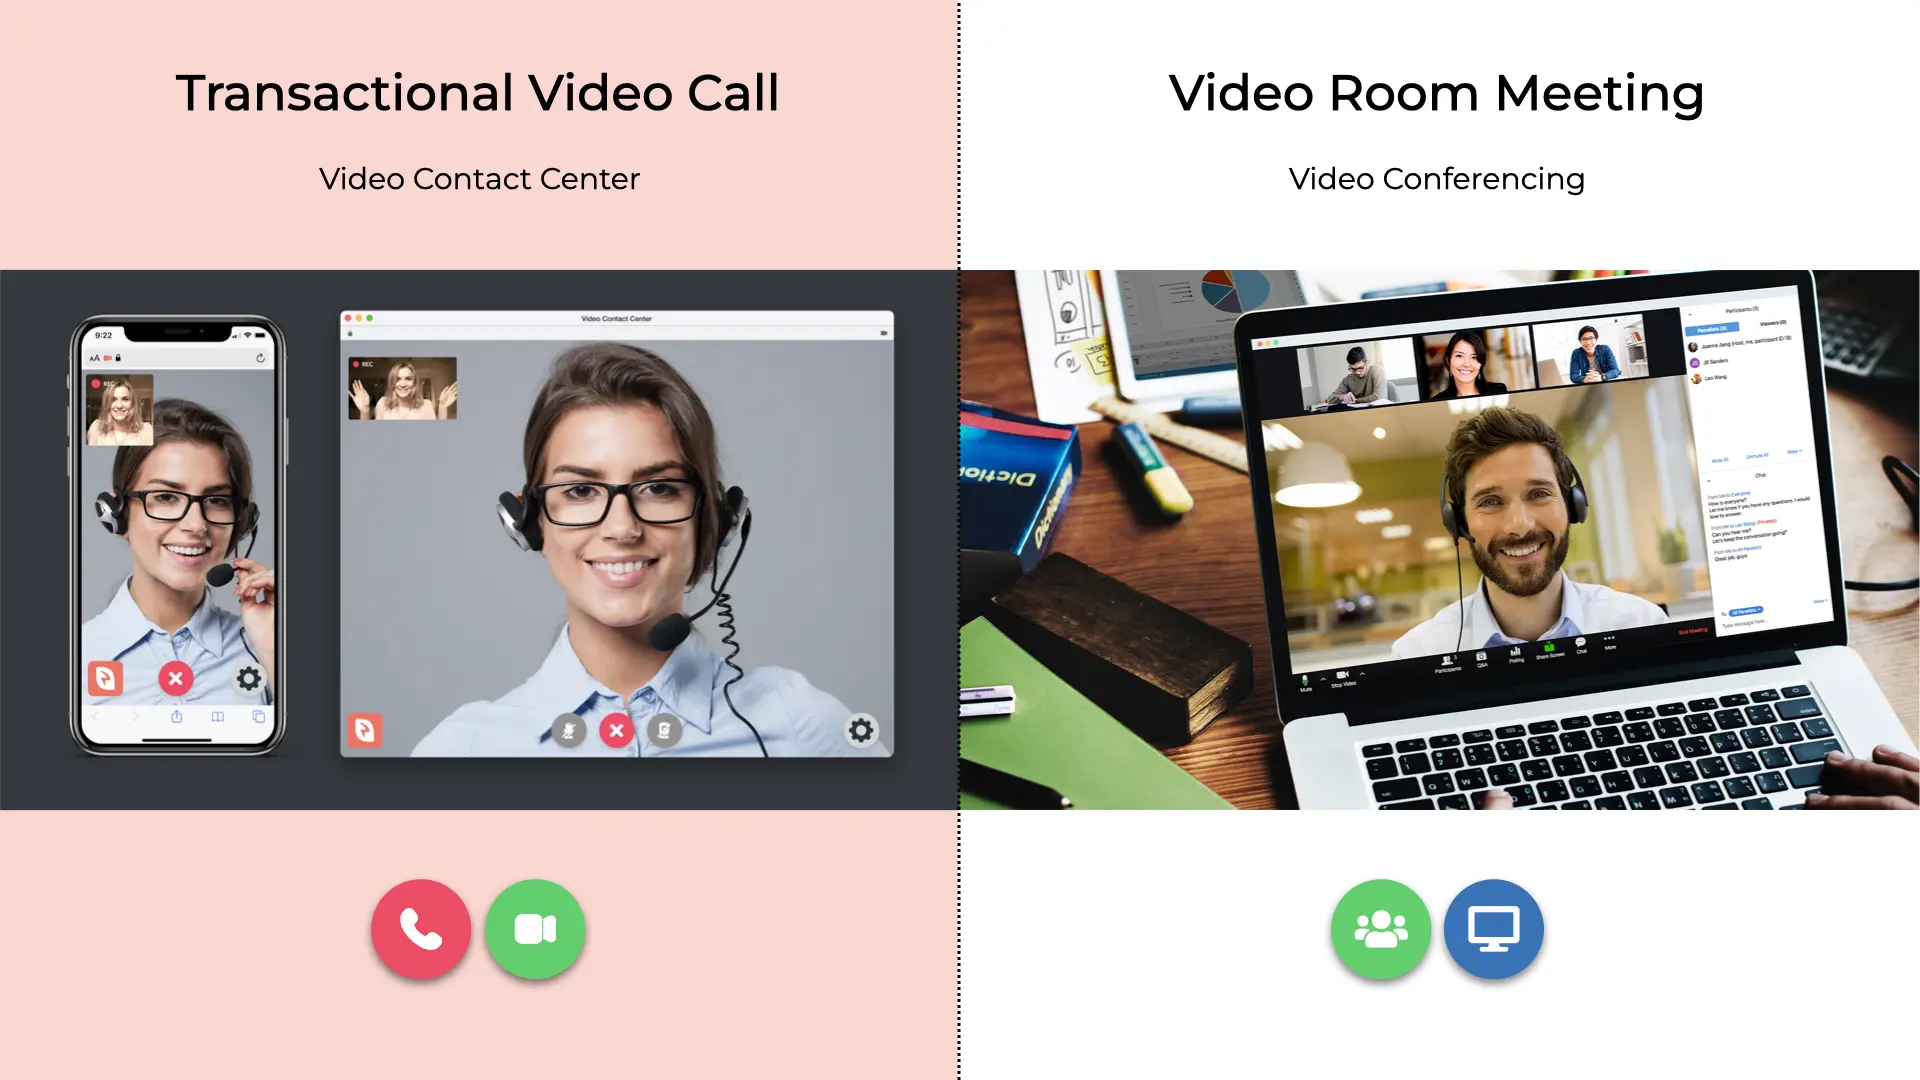 transactional video calls and video room meetings